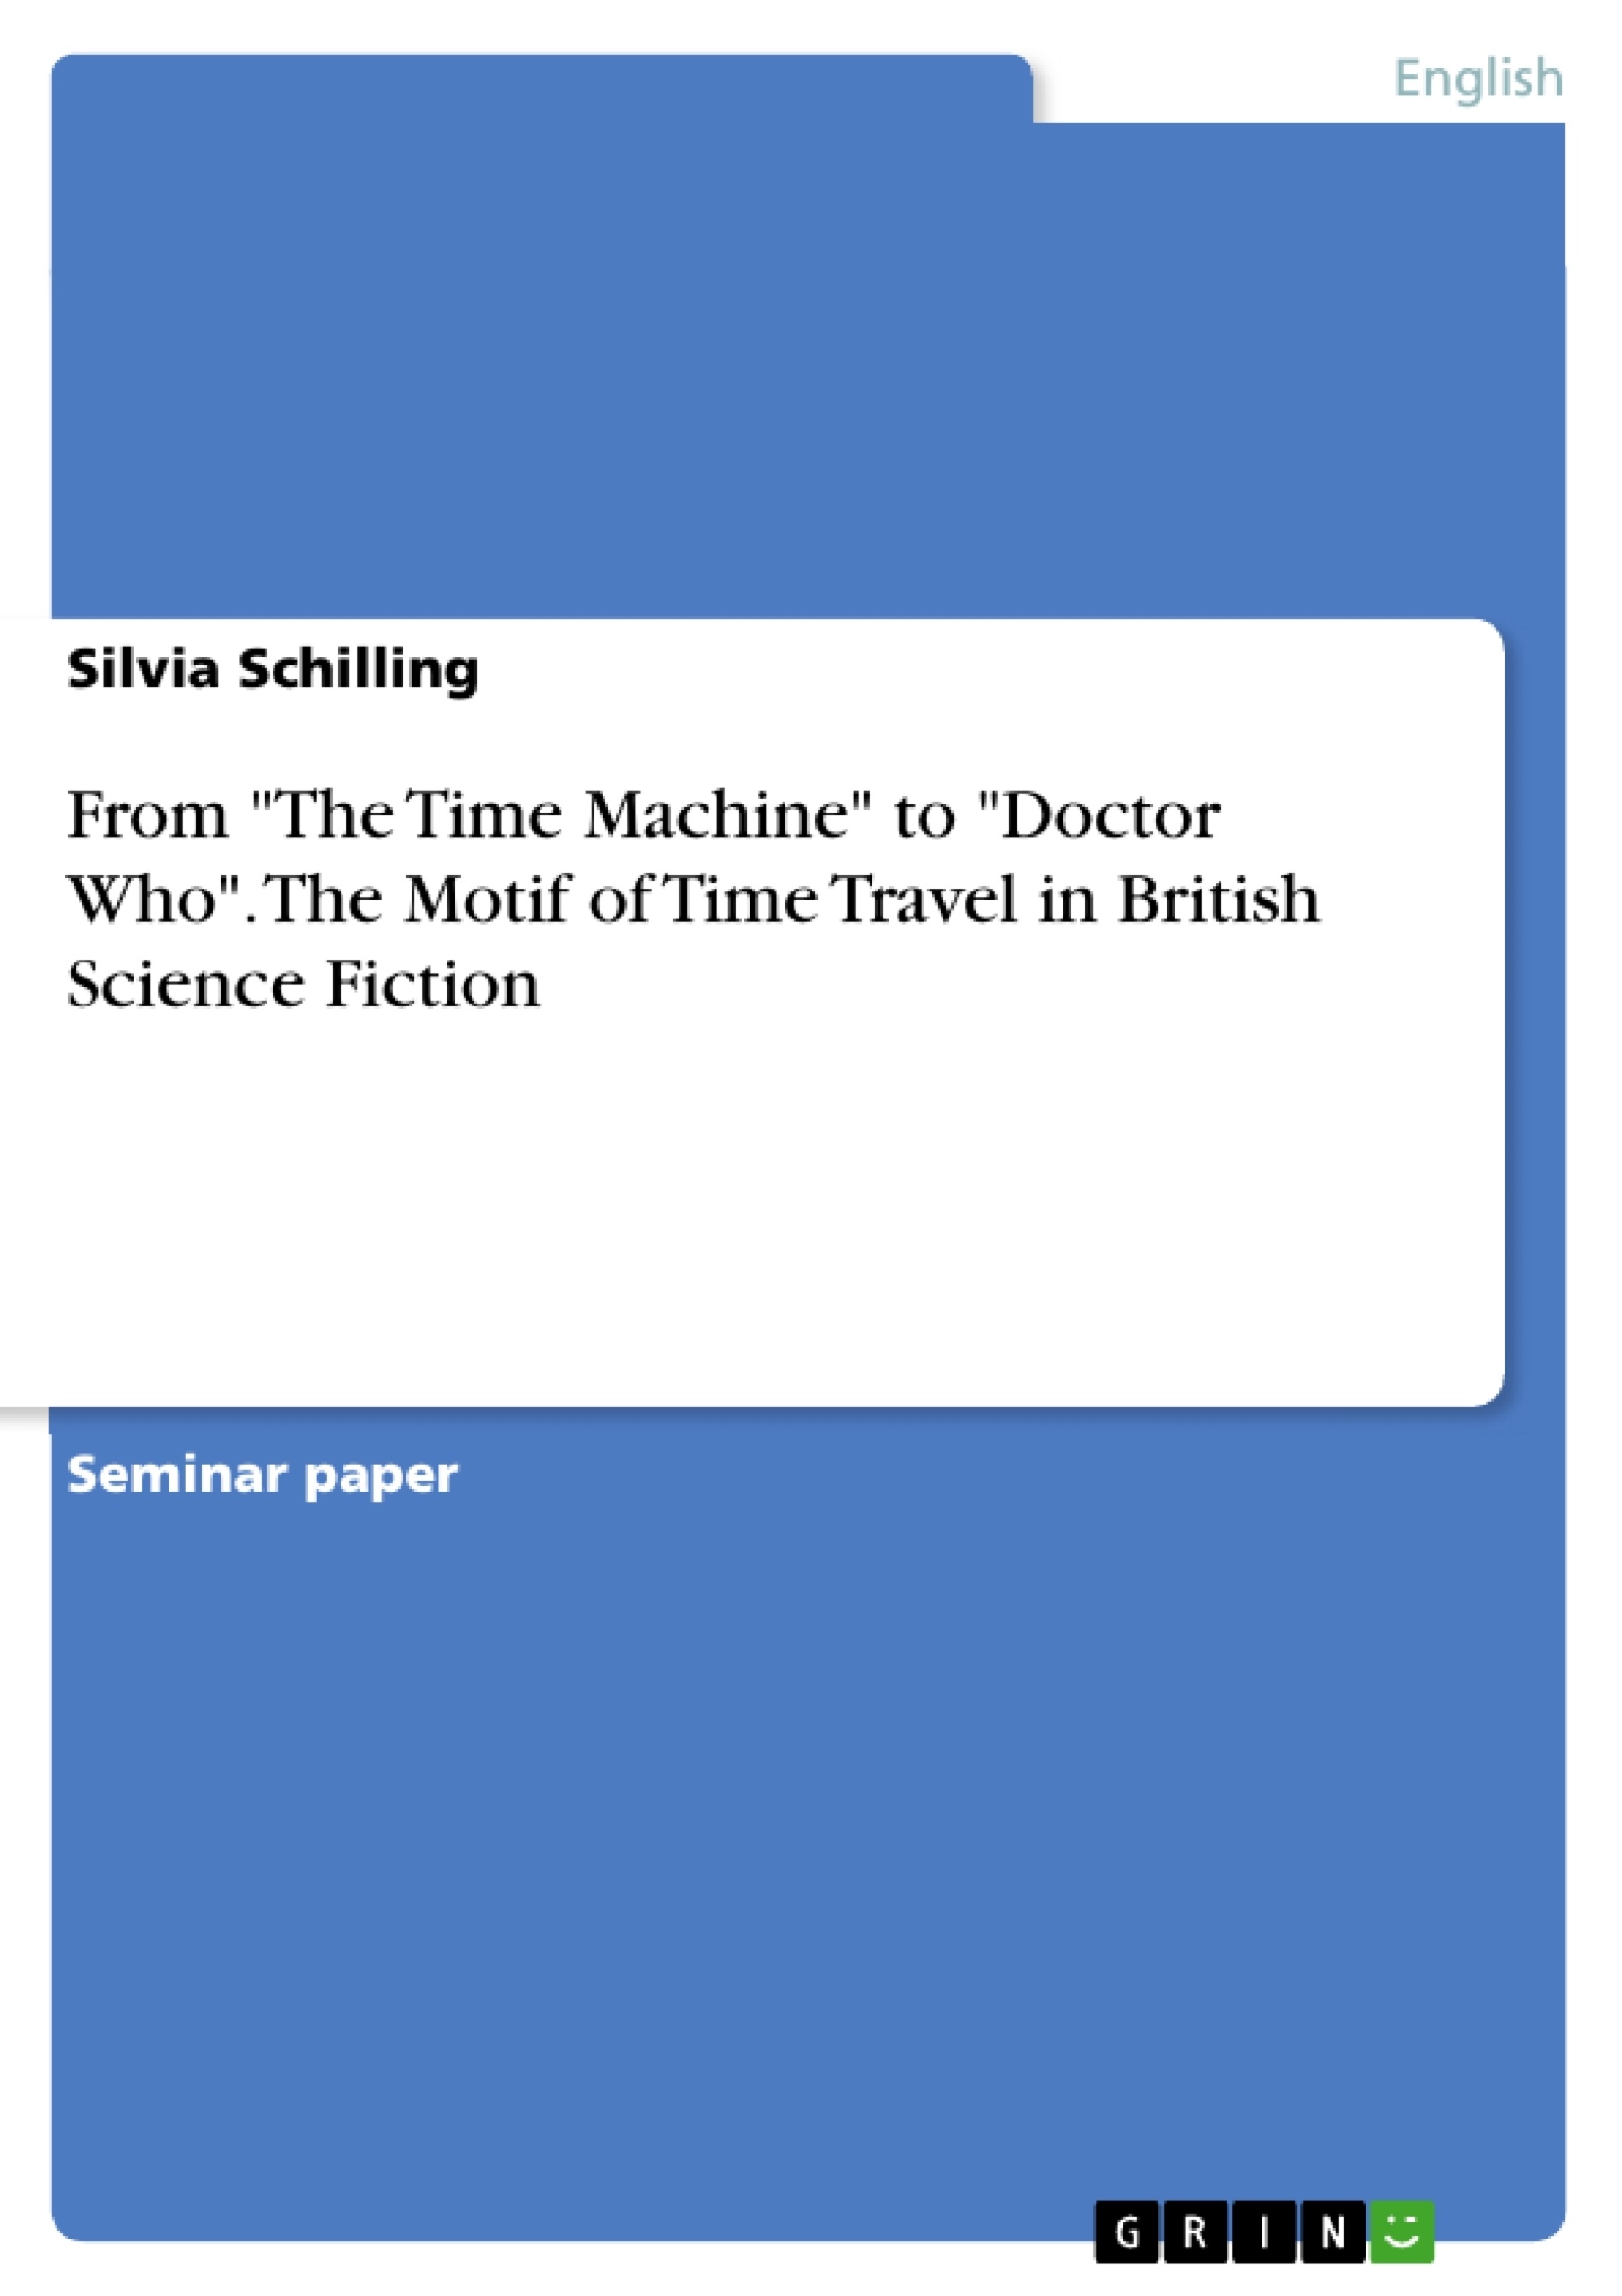 Title: From "The Time Machine" to "Doctor Who". The Motif of Time Travel in British Science Fiction